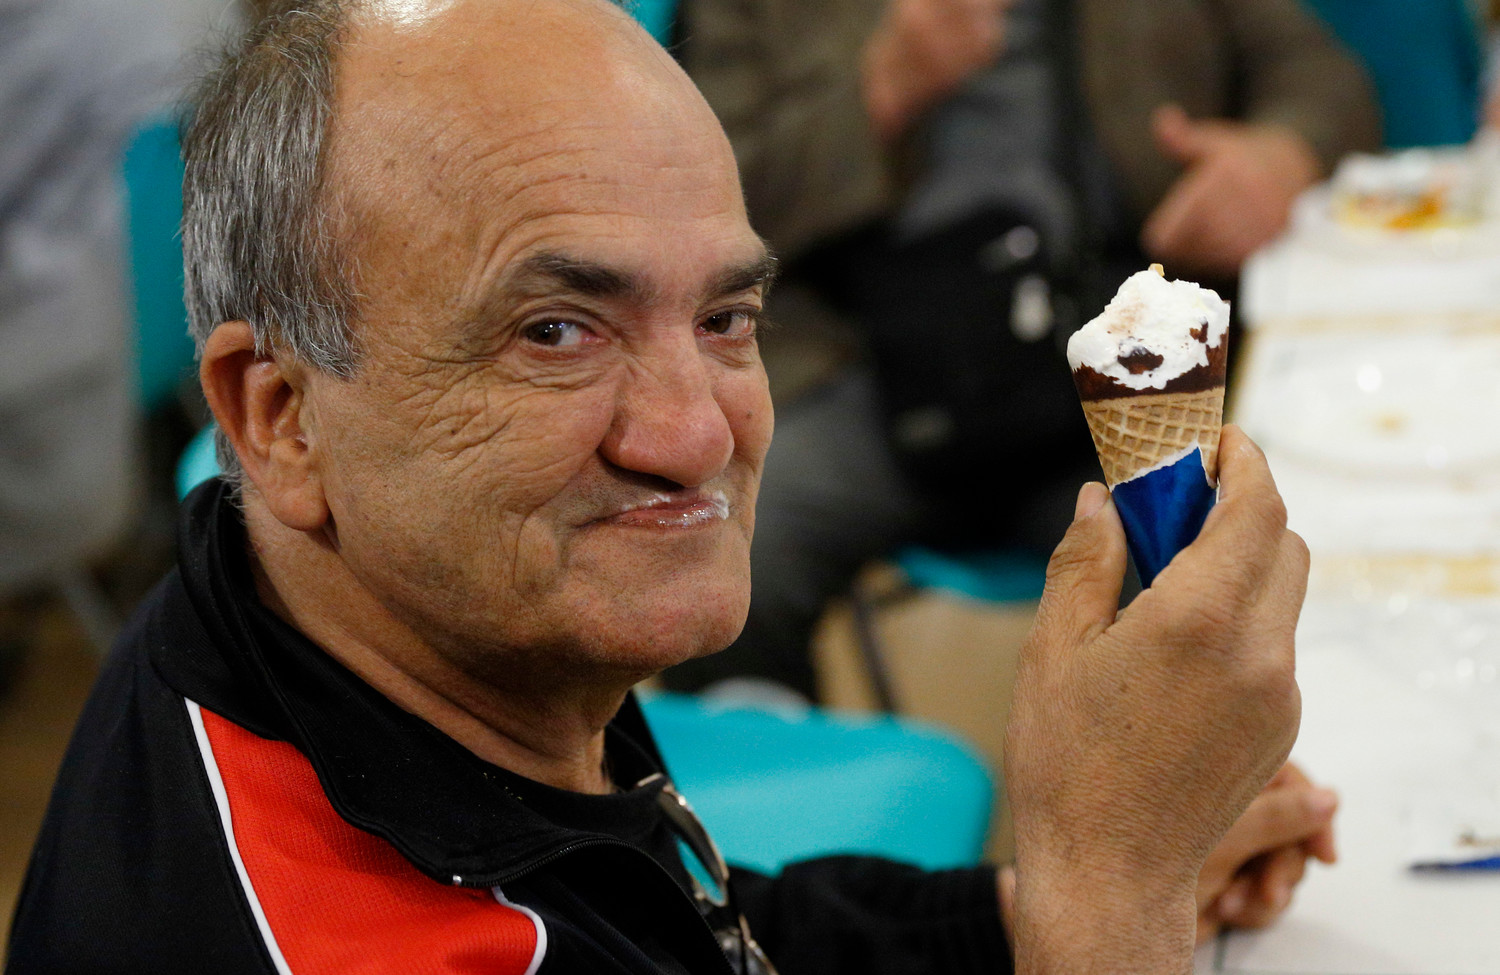 Antonino Siragusa enjoys an ice cream cone donated by Pope Francis at a Sant’Egidio soup kitchen in Rome April 23. In honor of his name day, the feast of St. George, the Pope donated 3,000 servings of ice cream to soup kitchens and homeless shelters around Rome.